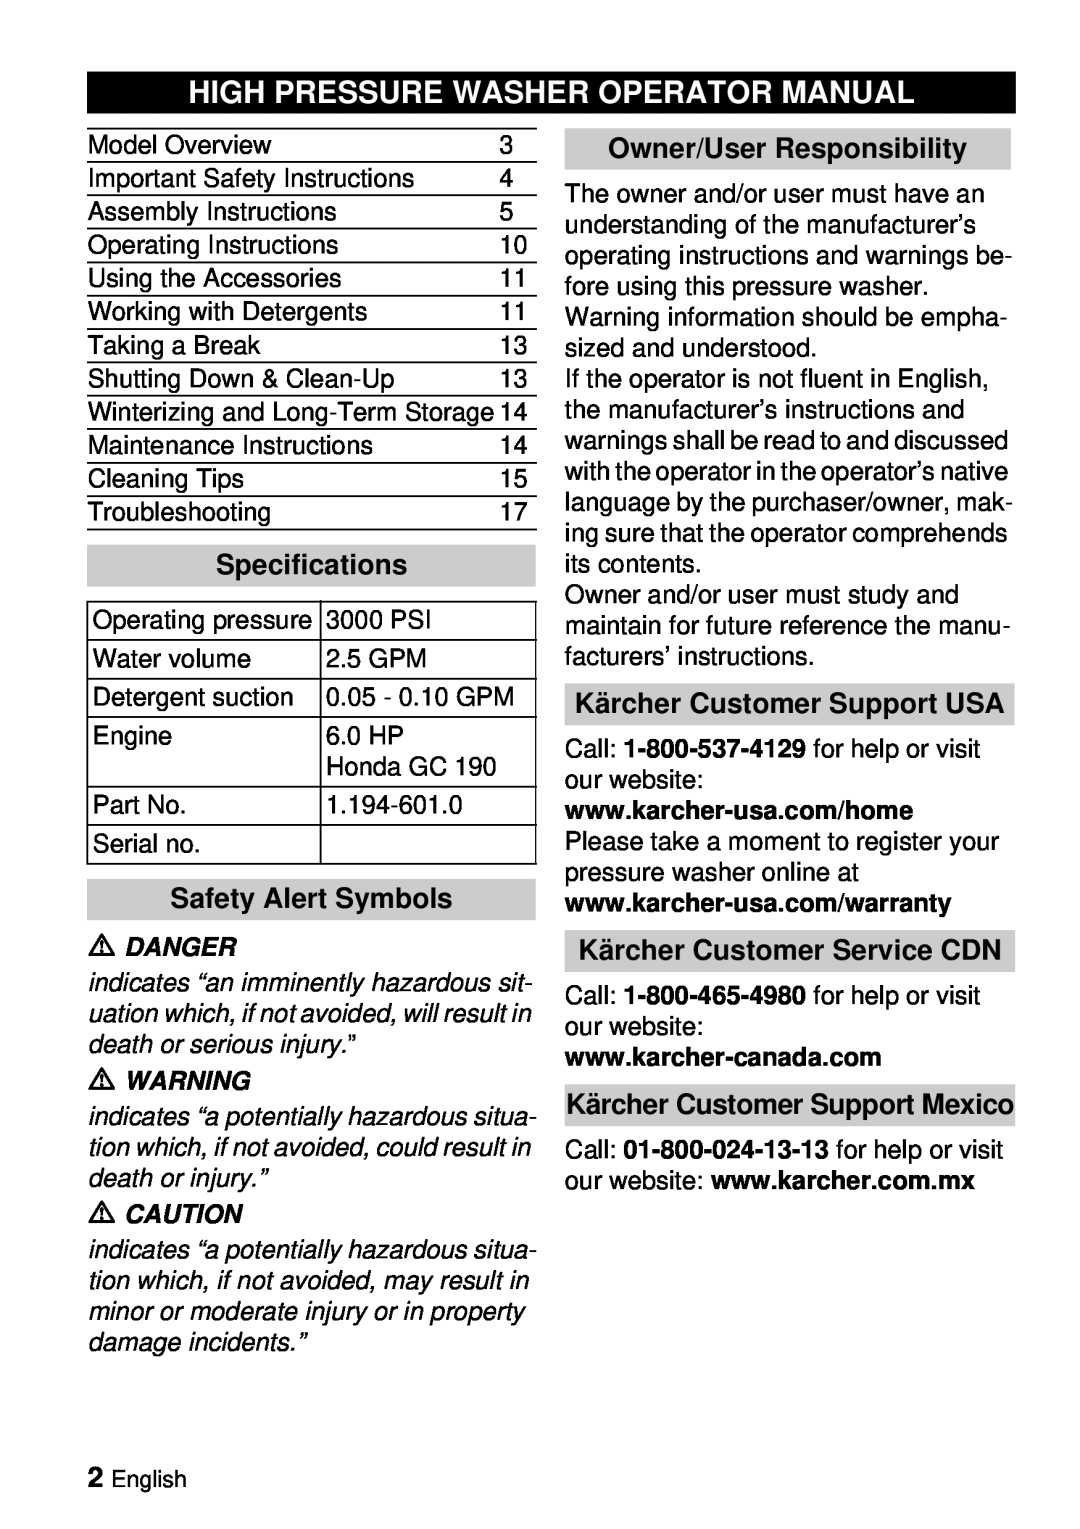 Karcher G 3000 BH High Pressure Washer Operator Manual, Specifications, Safety Alert Symbols, Owner/User Responsibility 